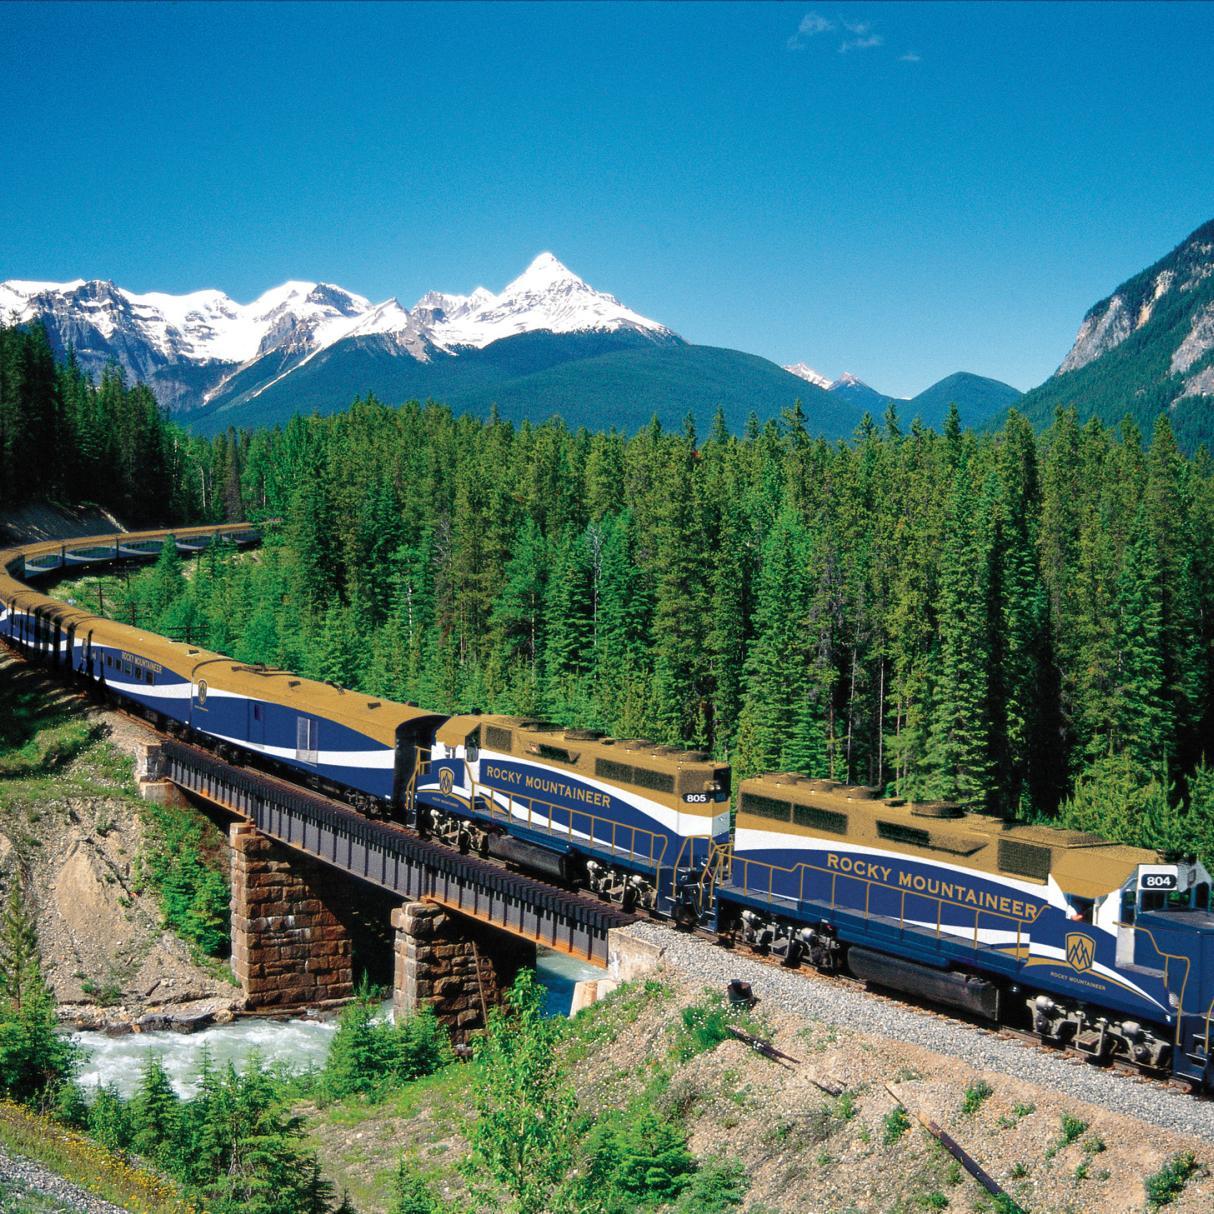 The Rocky Mountaineer train traveling over a rail bridge